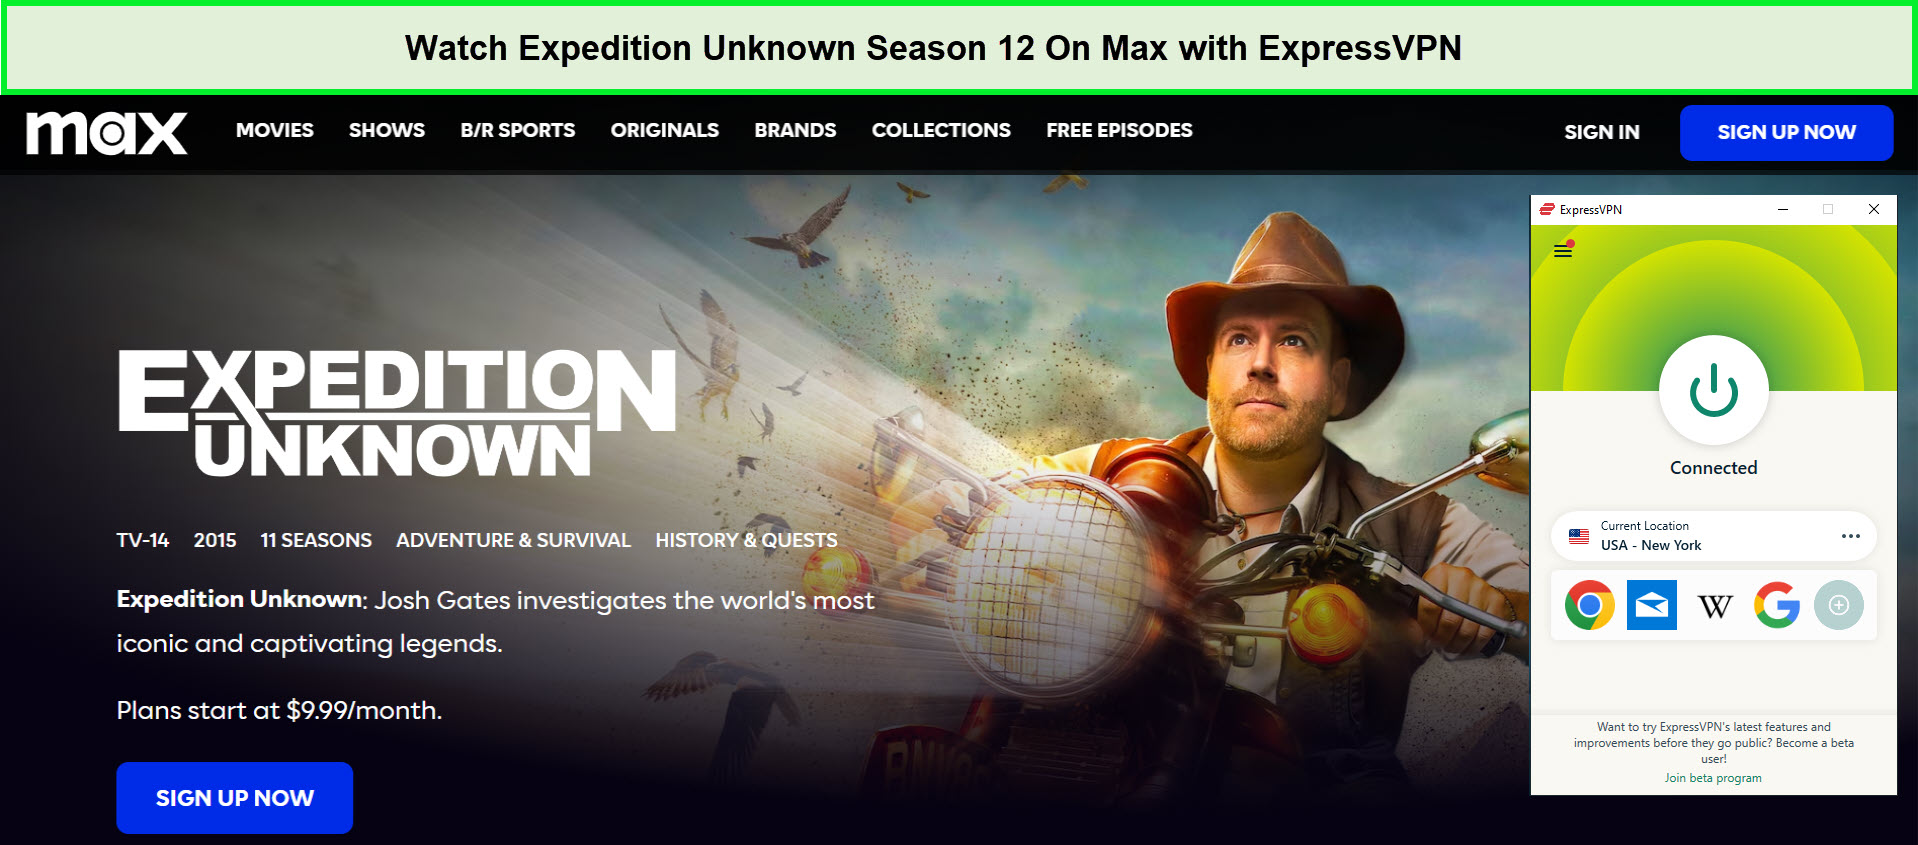 Watch-Expedition-Unknown-Season-12-in-Australia-On-Max-with-ExpressVPN